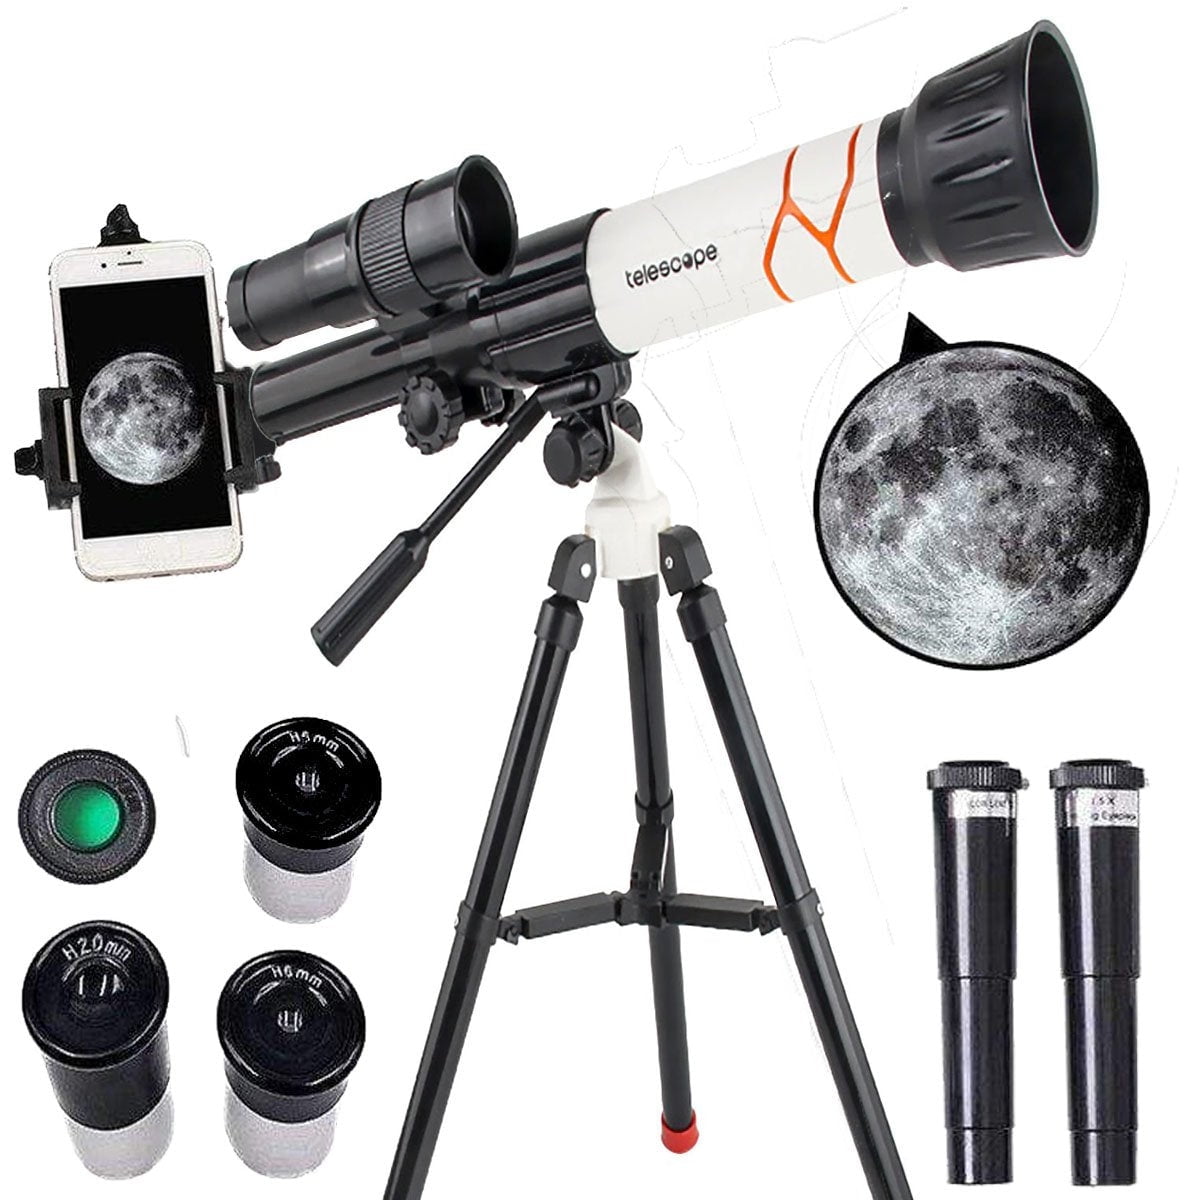 Best Kids Beginners Telescope 100X Astronomical Telescope with Tripod pic